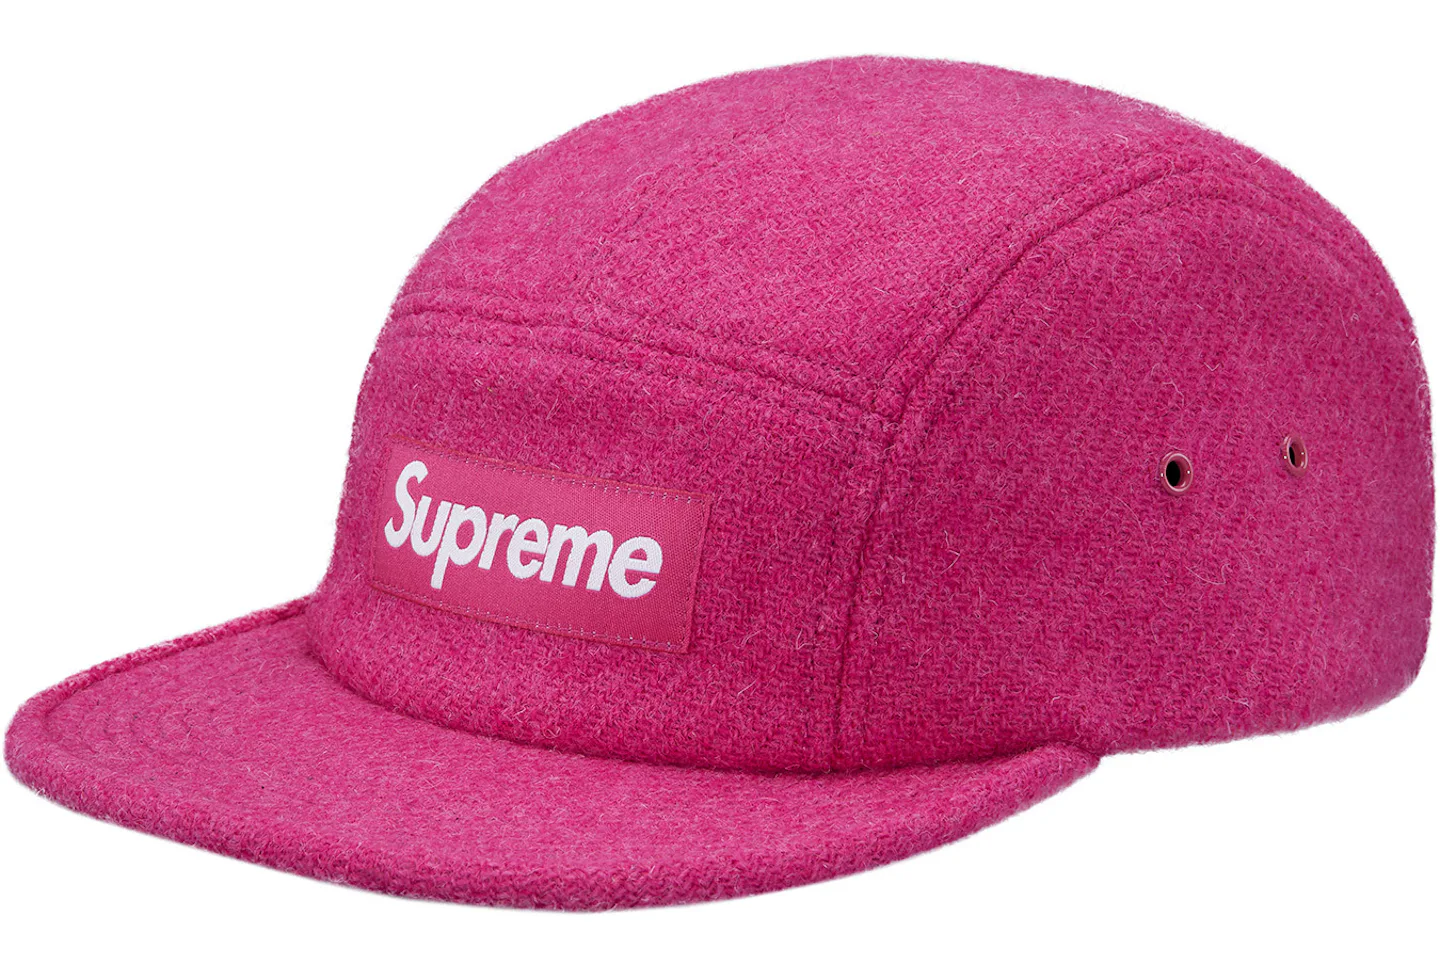 Supreme Featherweight Wool Camp Cap (FW17) Pink - FW17